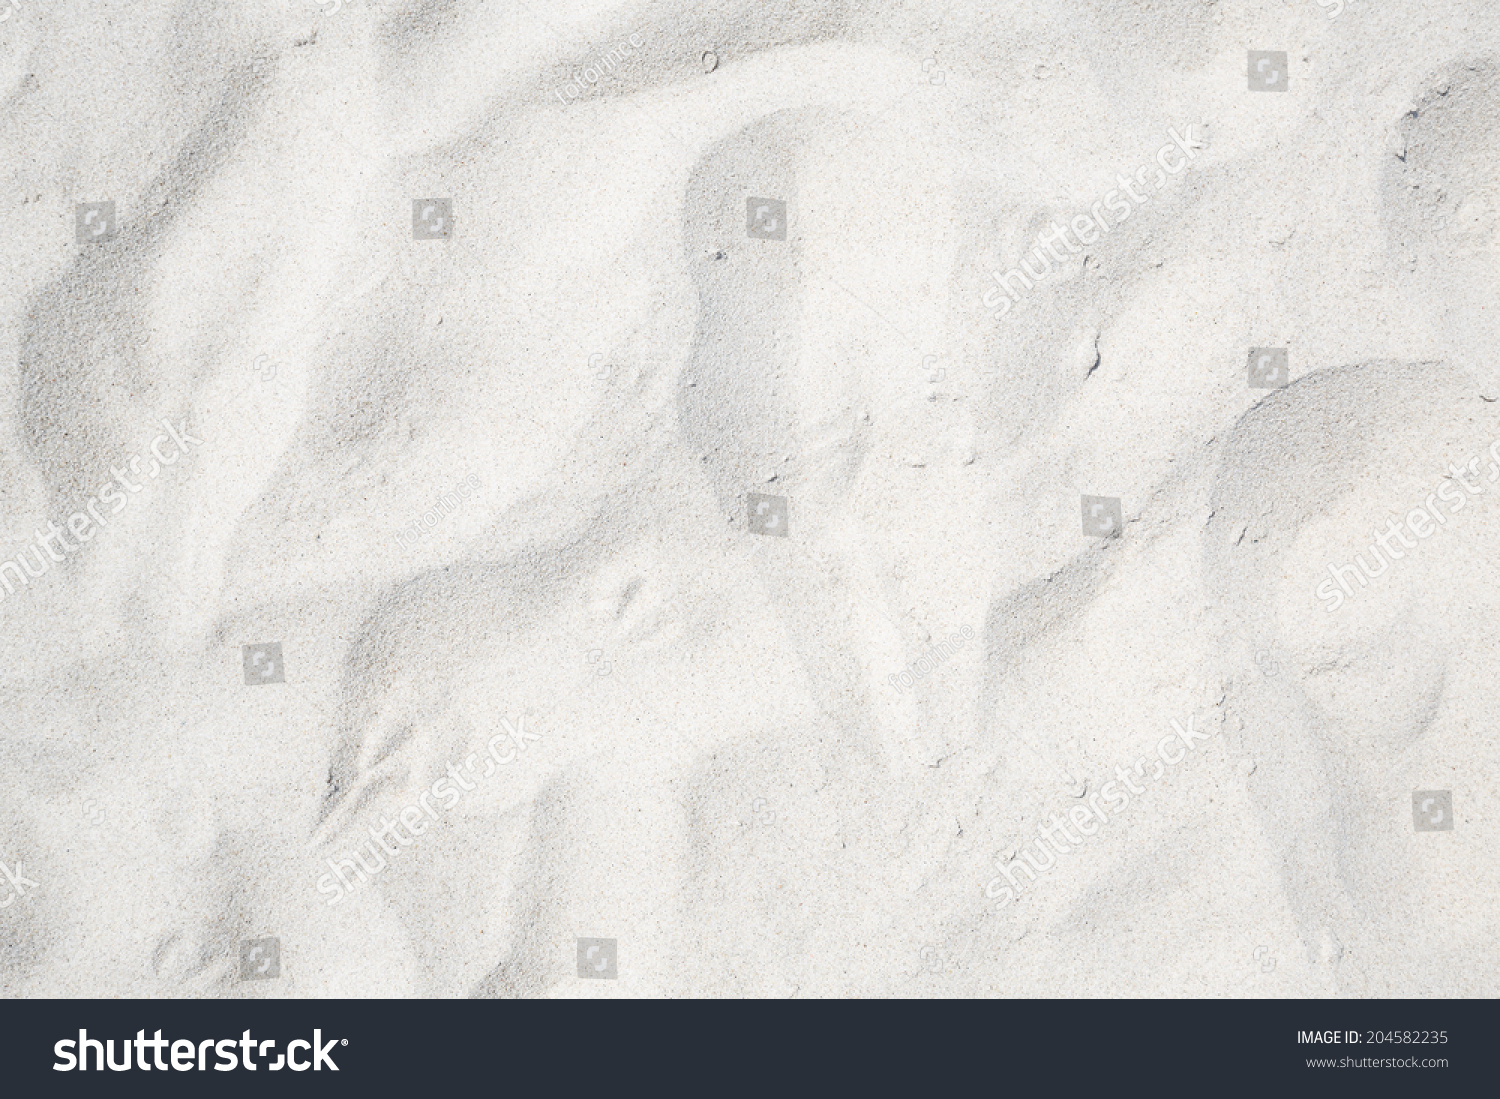 Sand on the the beach as background #204582235